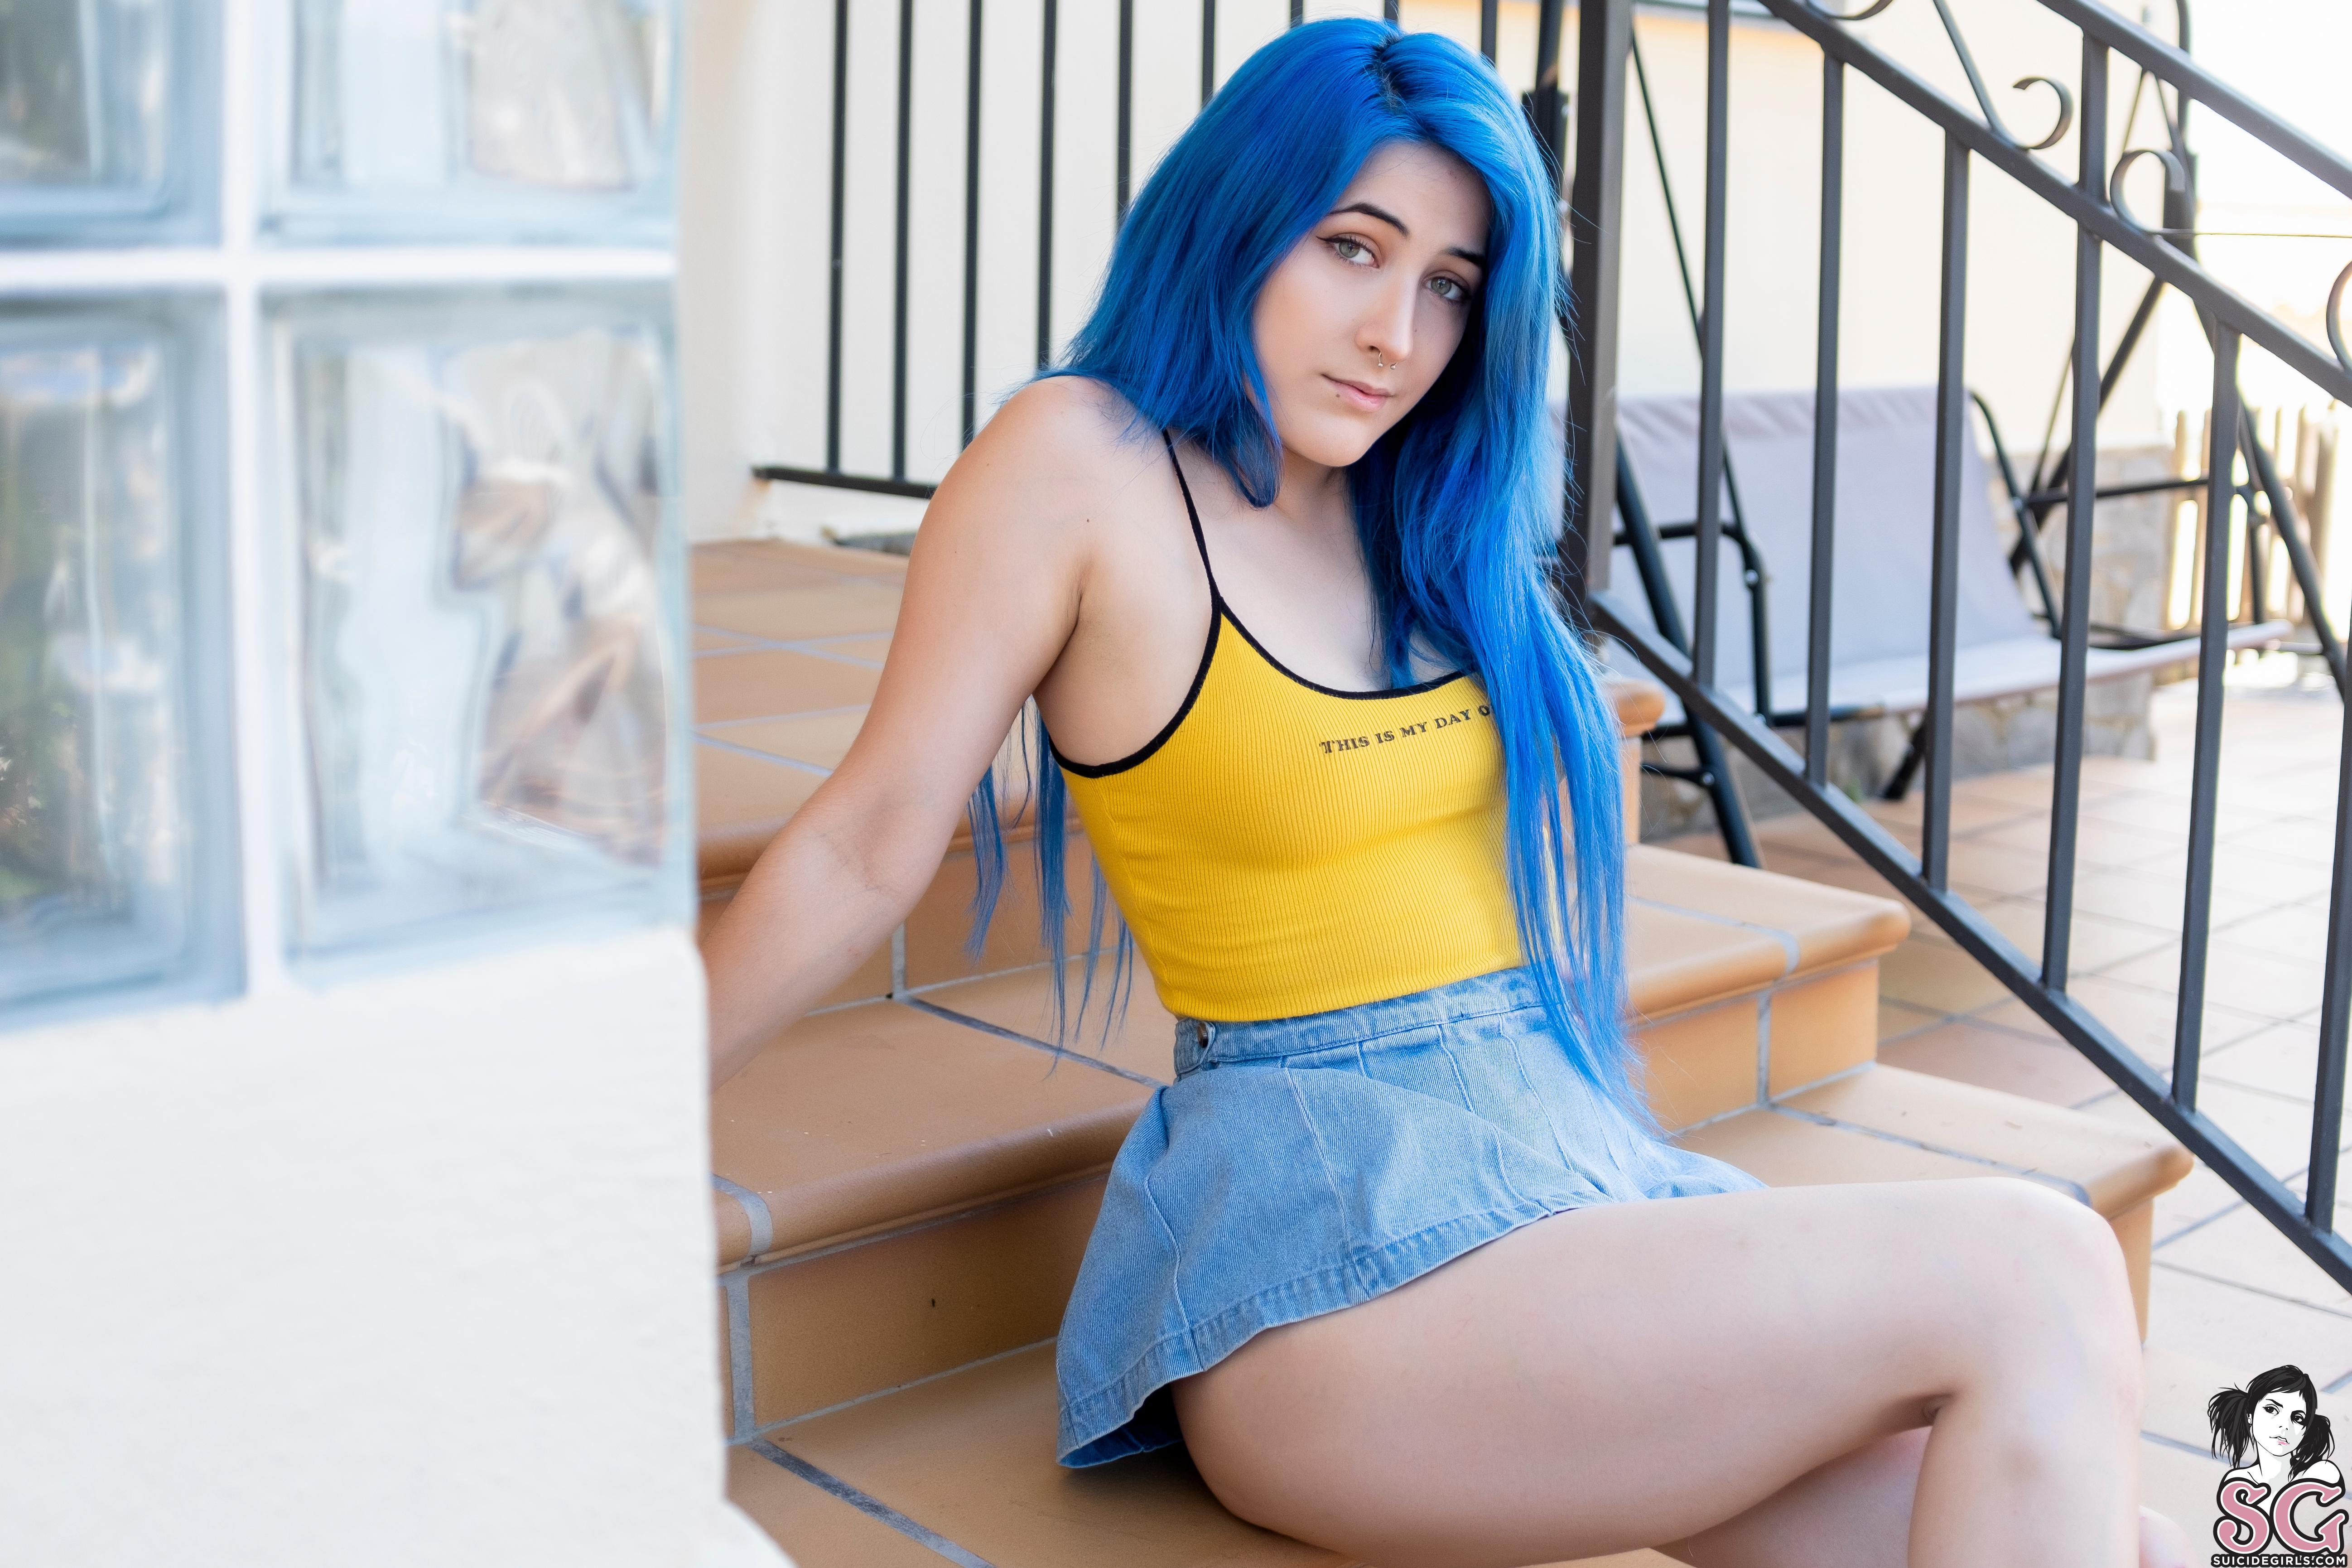 Mhere Suicide Girls Long Hair Blue Hair Model Thighs Women